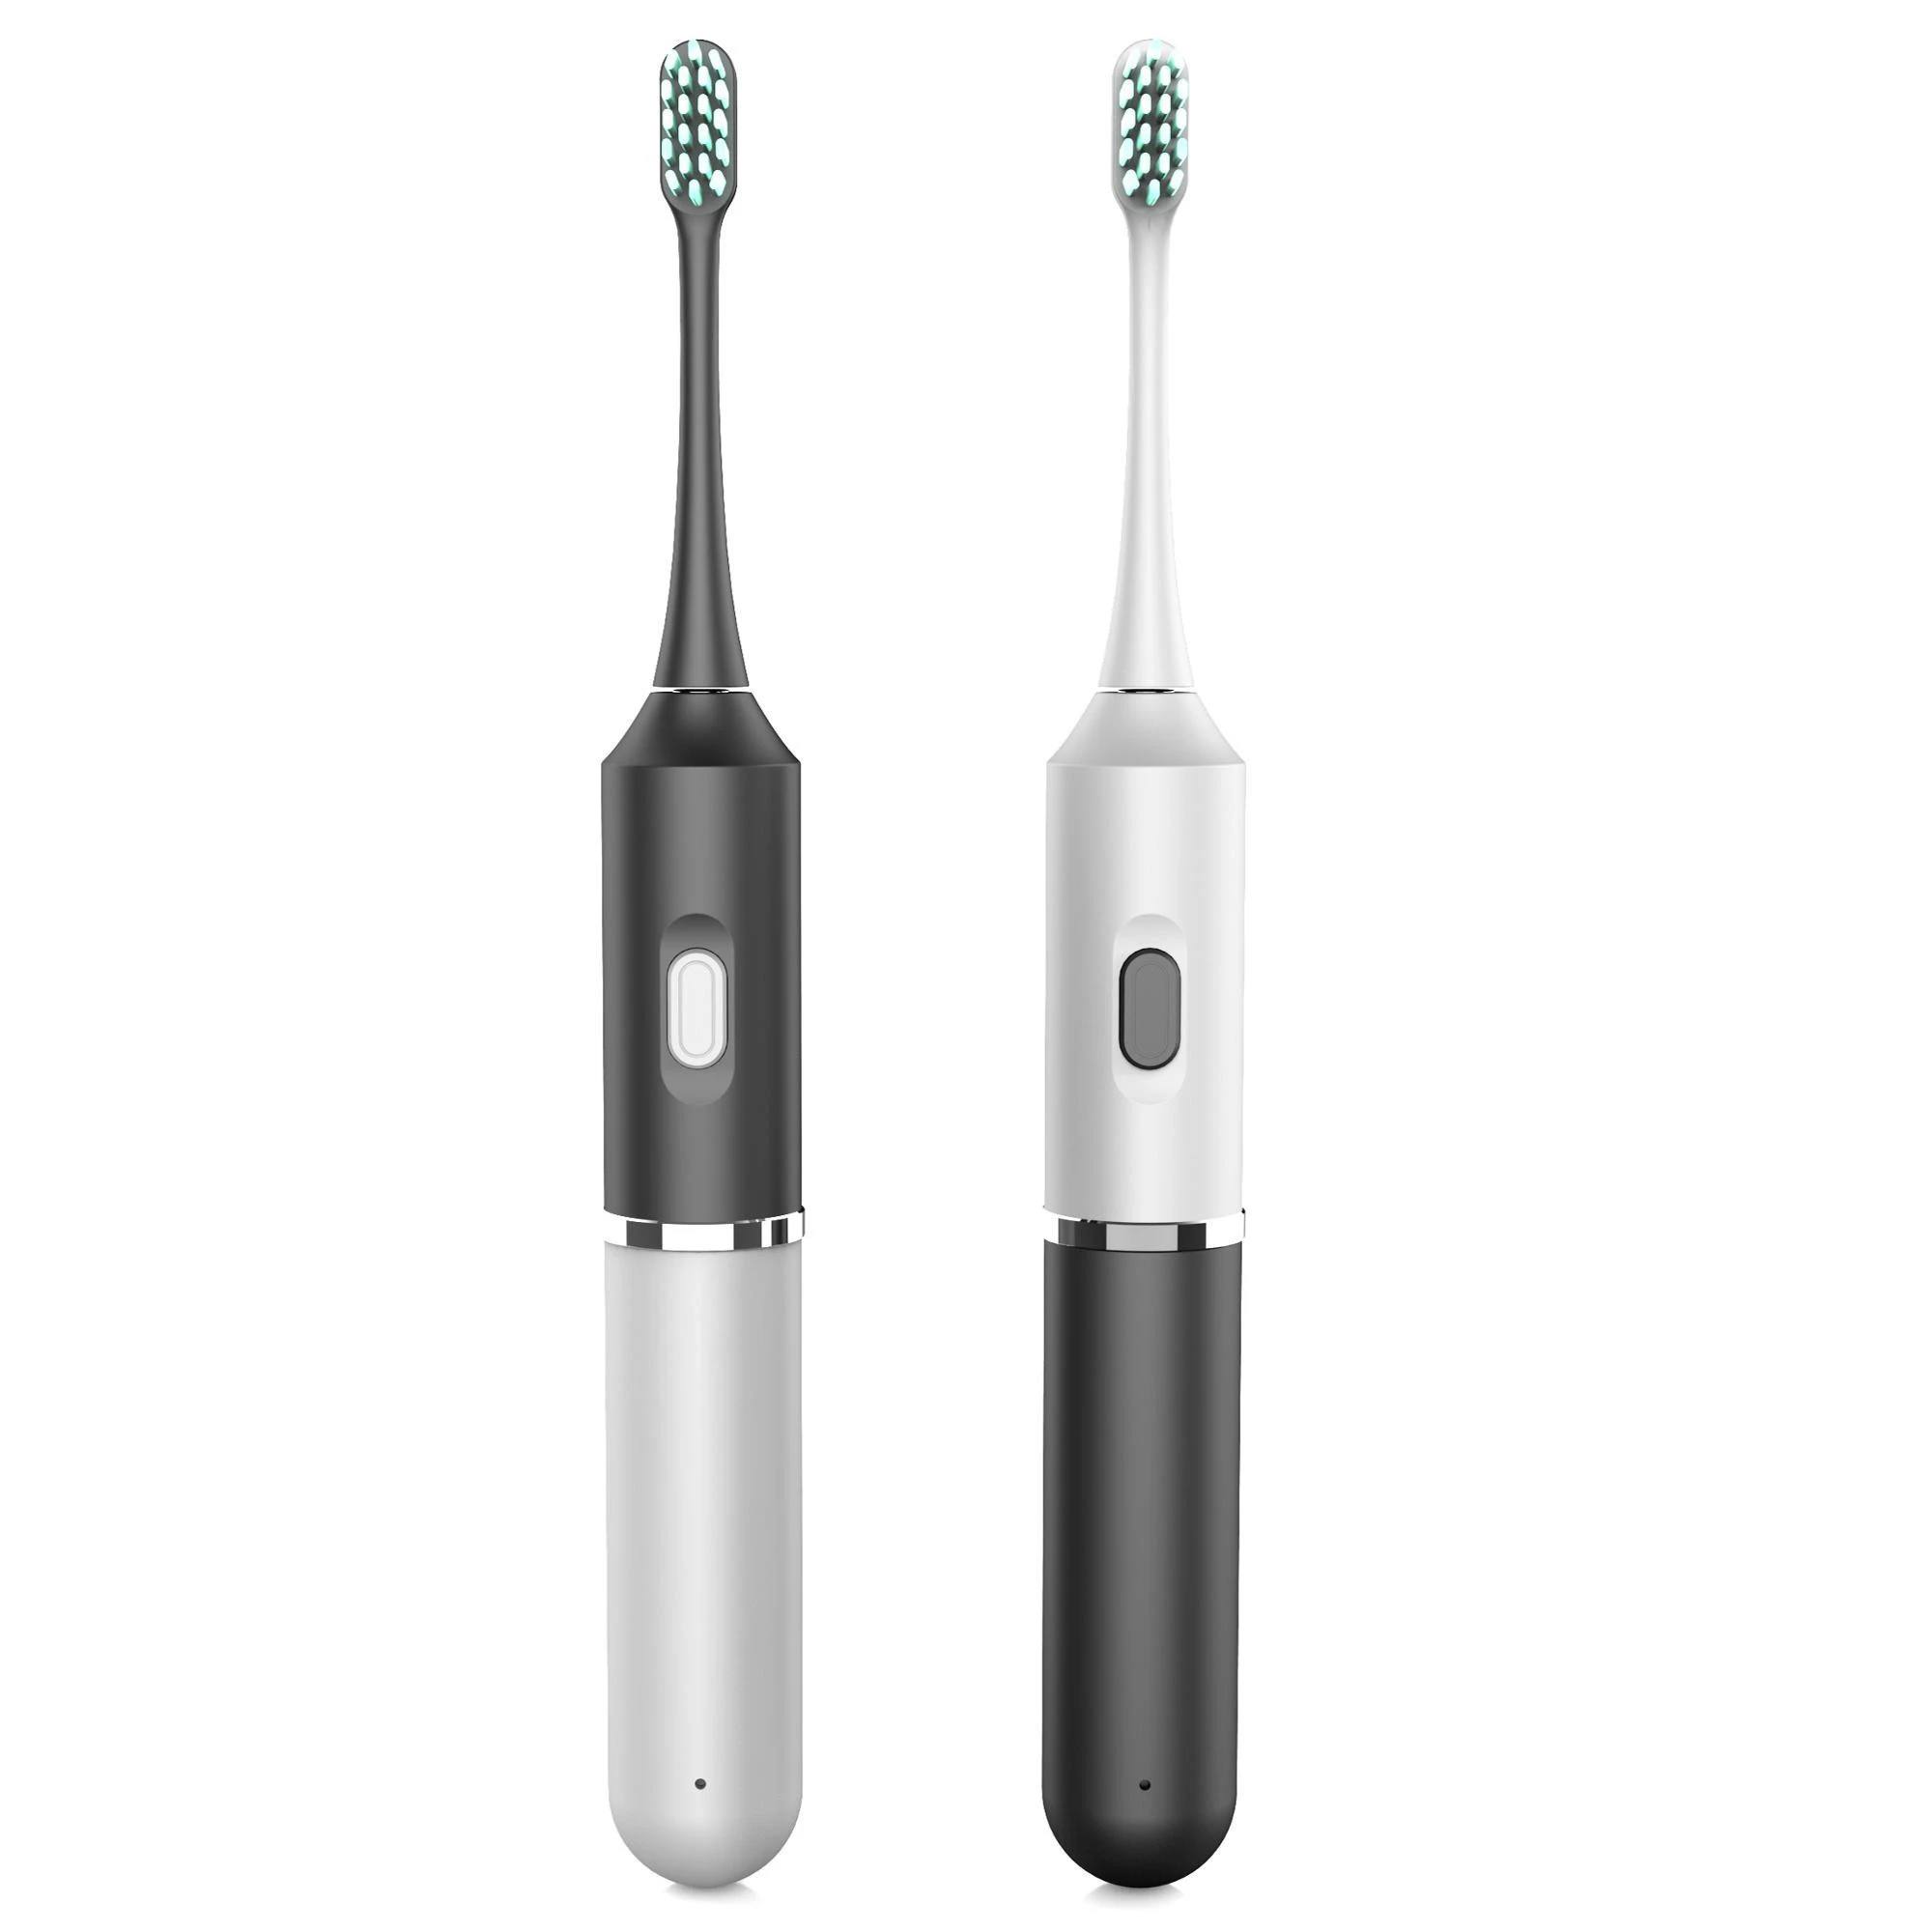 Onuliss 2020 New charger Mini Electric Sonic Toothbrush Adult Travel Soft Tooth Brush Cepillo De Dien Brosse a Dent Teeth Brush